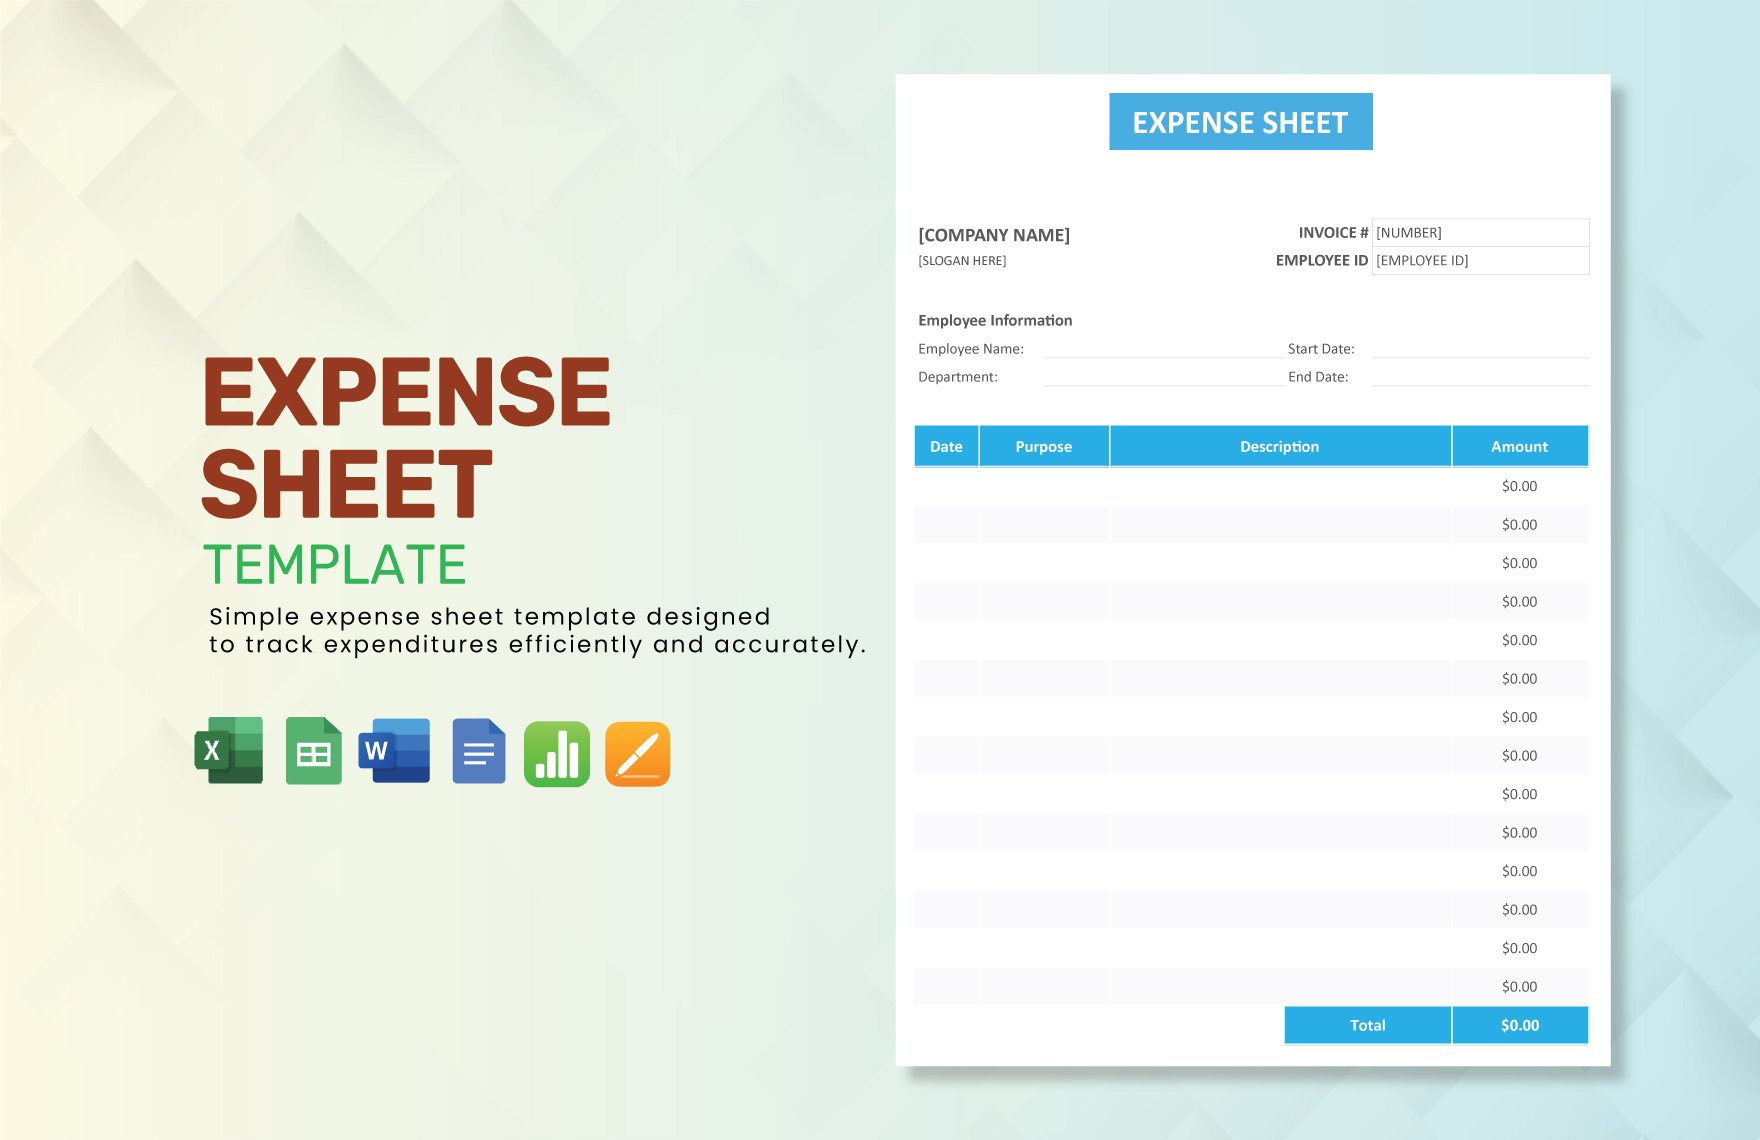 Expense Sheet Template in Word, Google Docs, Excel, Google Sheets, Apple Pages, Apple Numbers